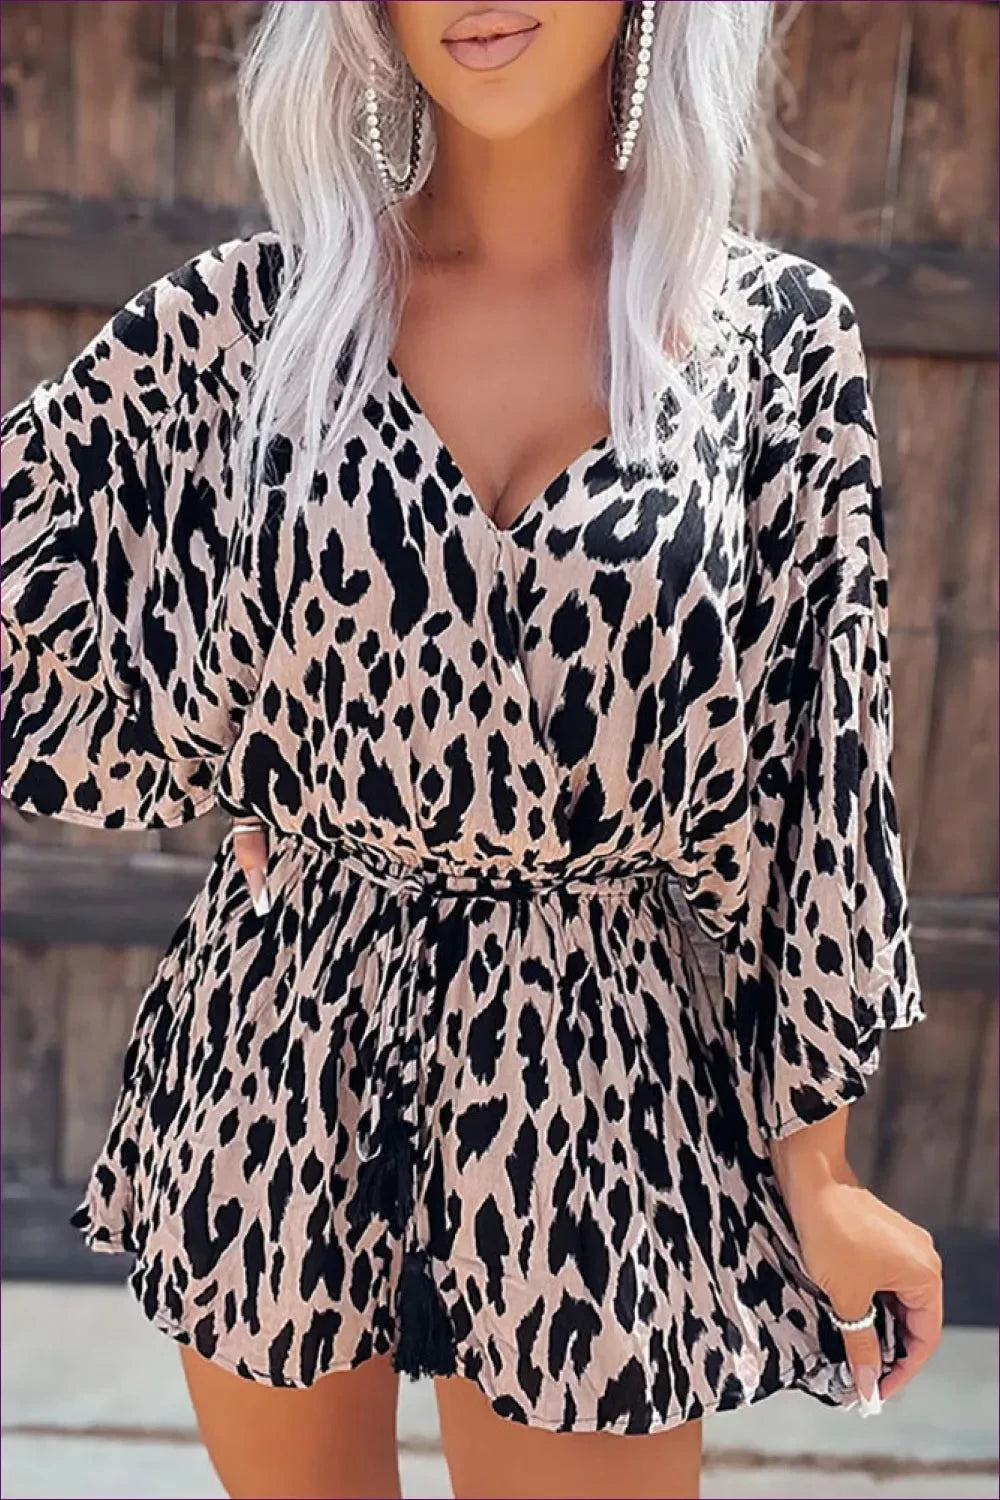 Command The Room With Primal Roar Of Elegance In Our Lantern Sleeve Leopard Print Playsuit. Your Statement